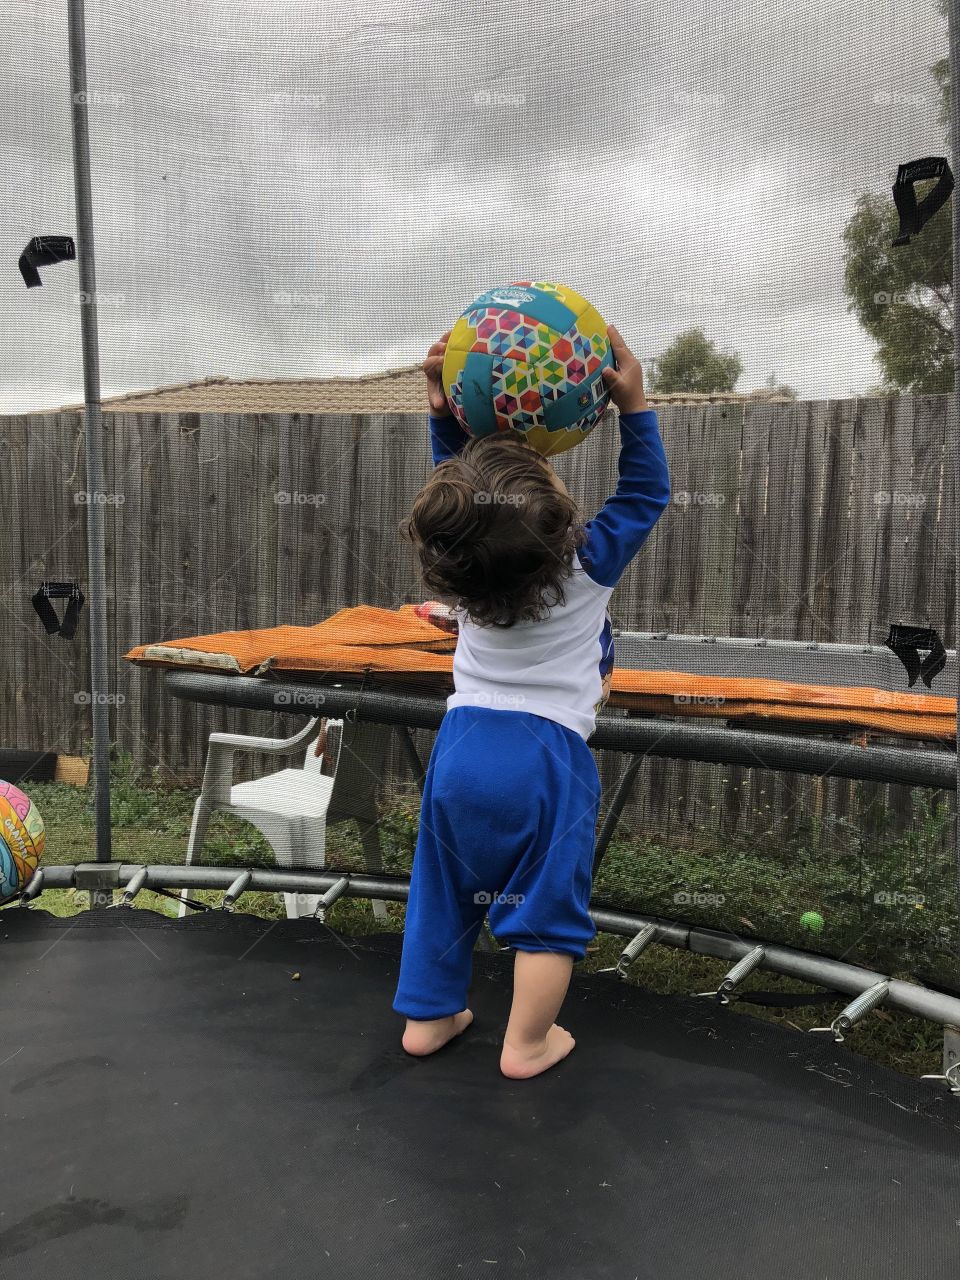 Playing on trampoline 